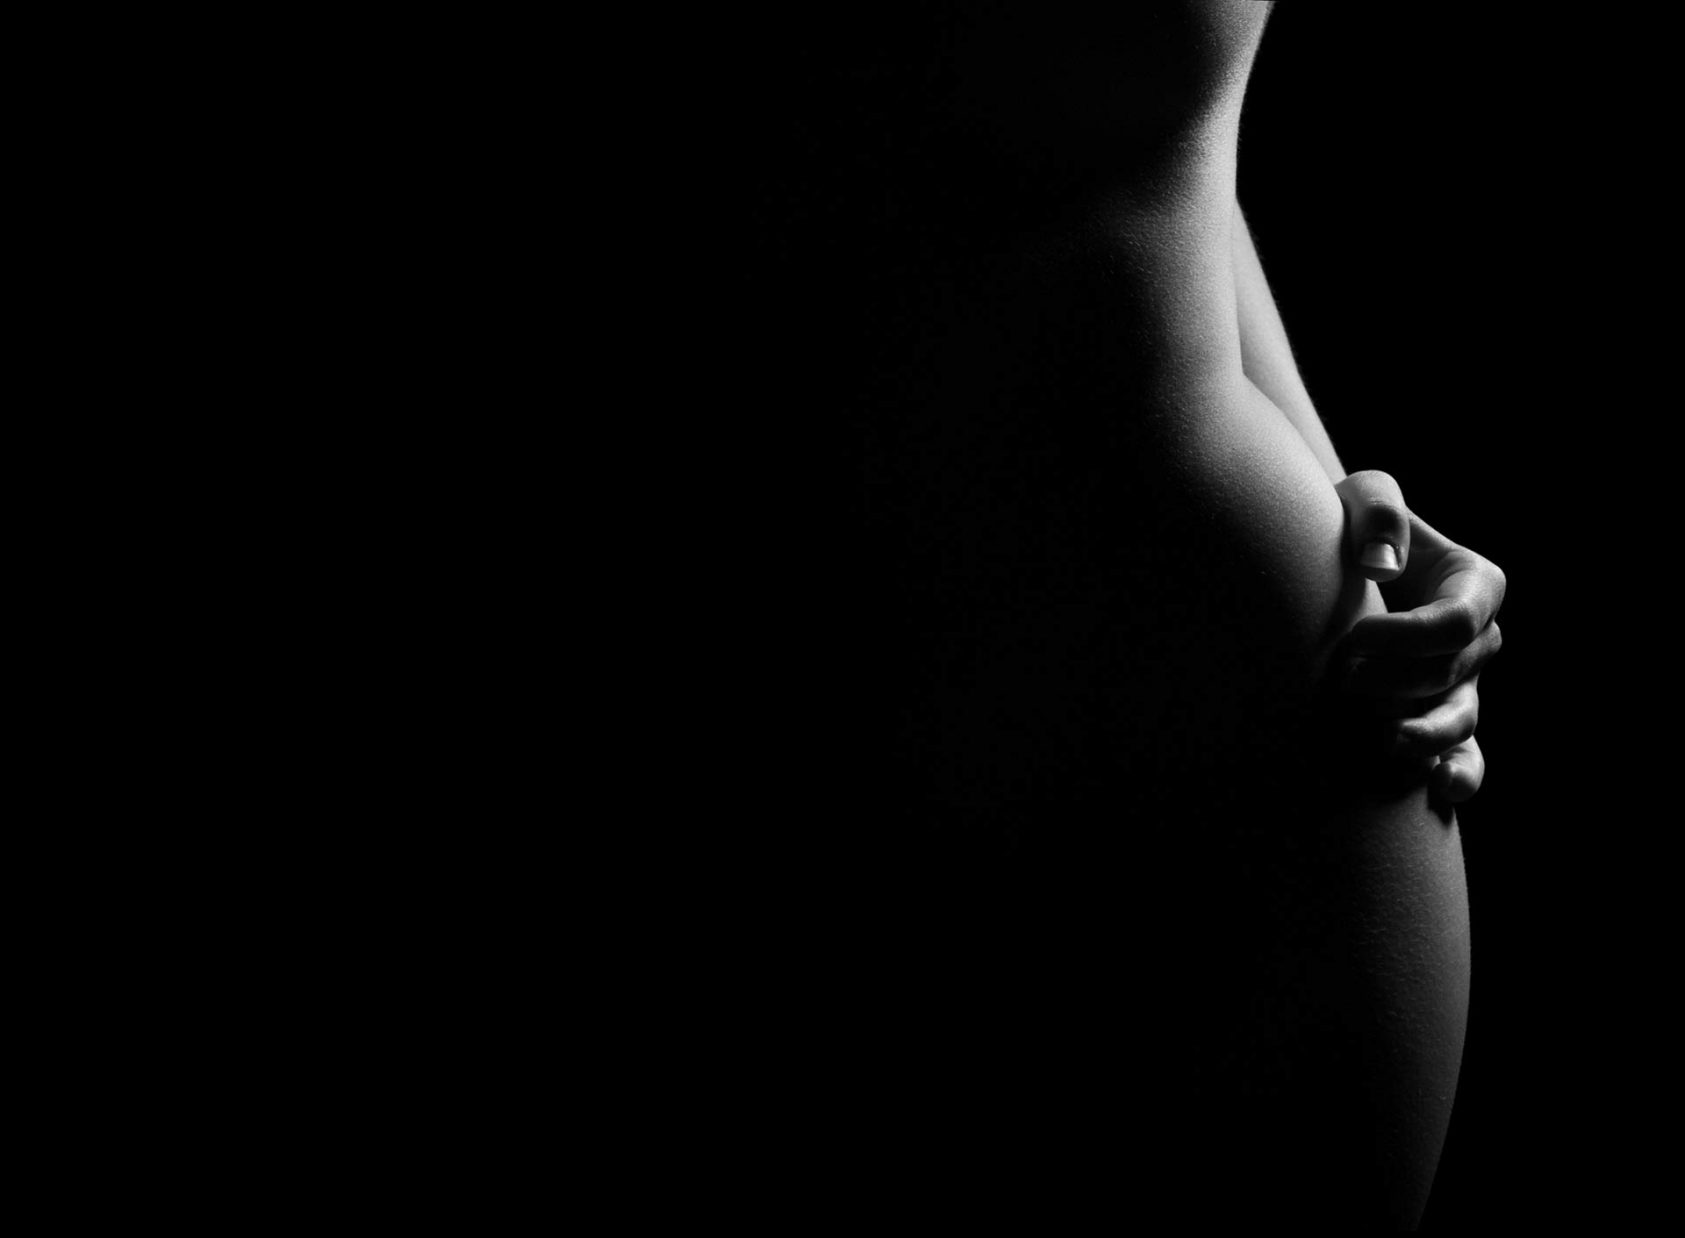 Single Nudist Matures - High Contrast Nude Photography - How to light and shoot ...